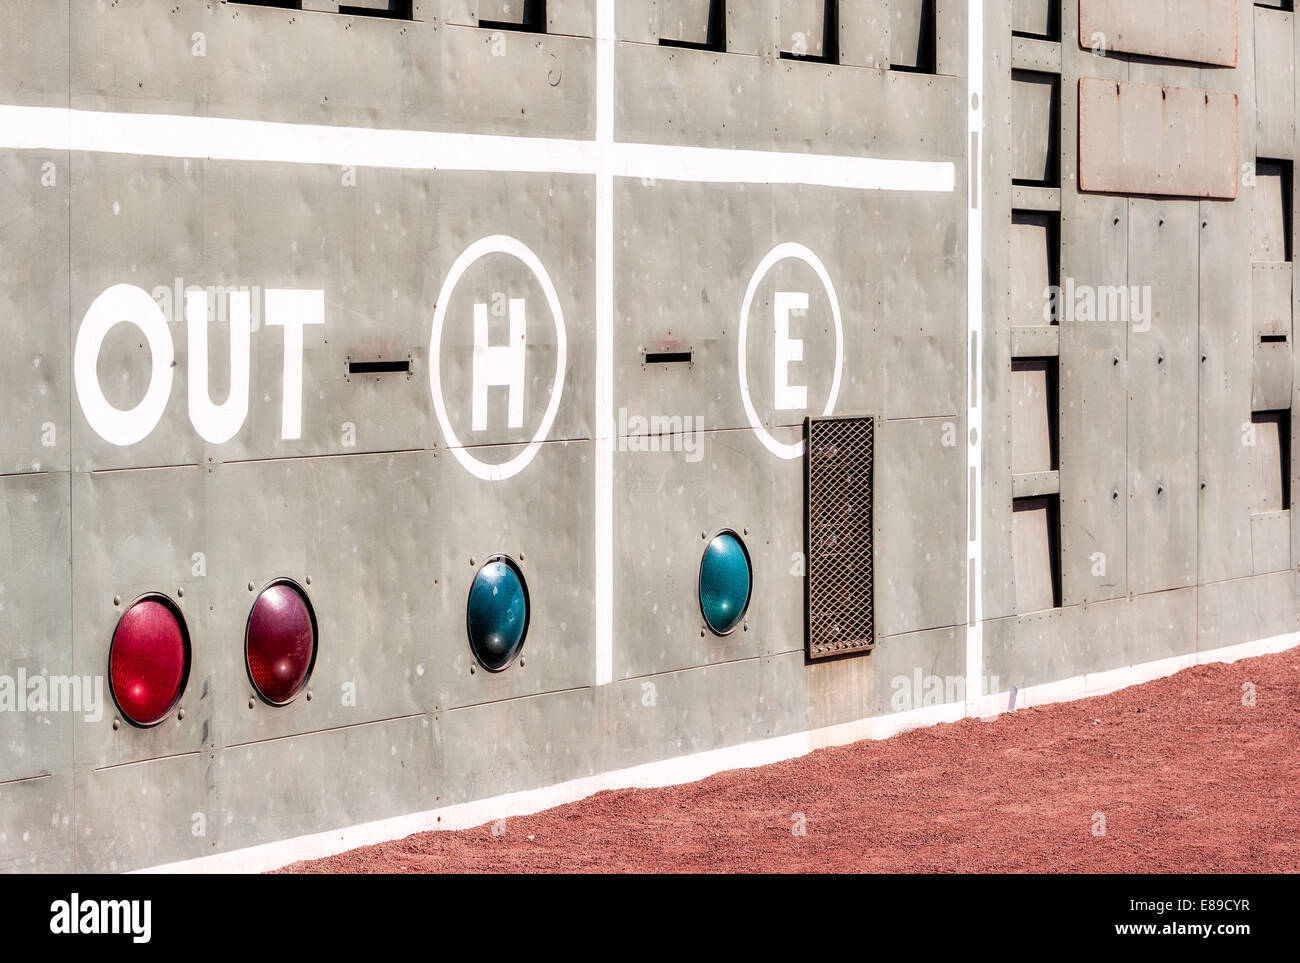 Fenway Park's Green Monster section of Out - H - E -  of the manual scoreboard. Stock Photo